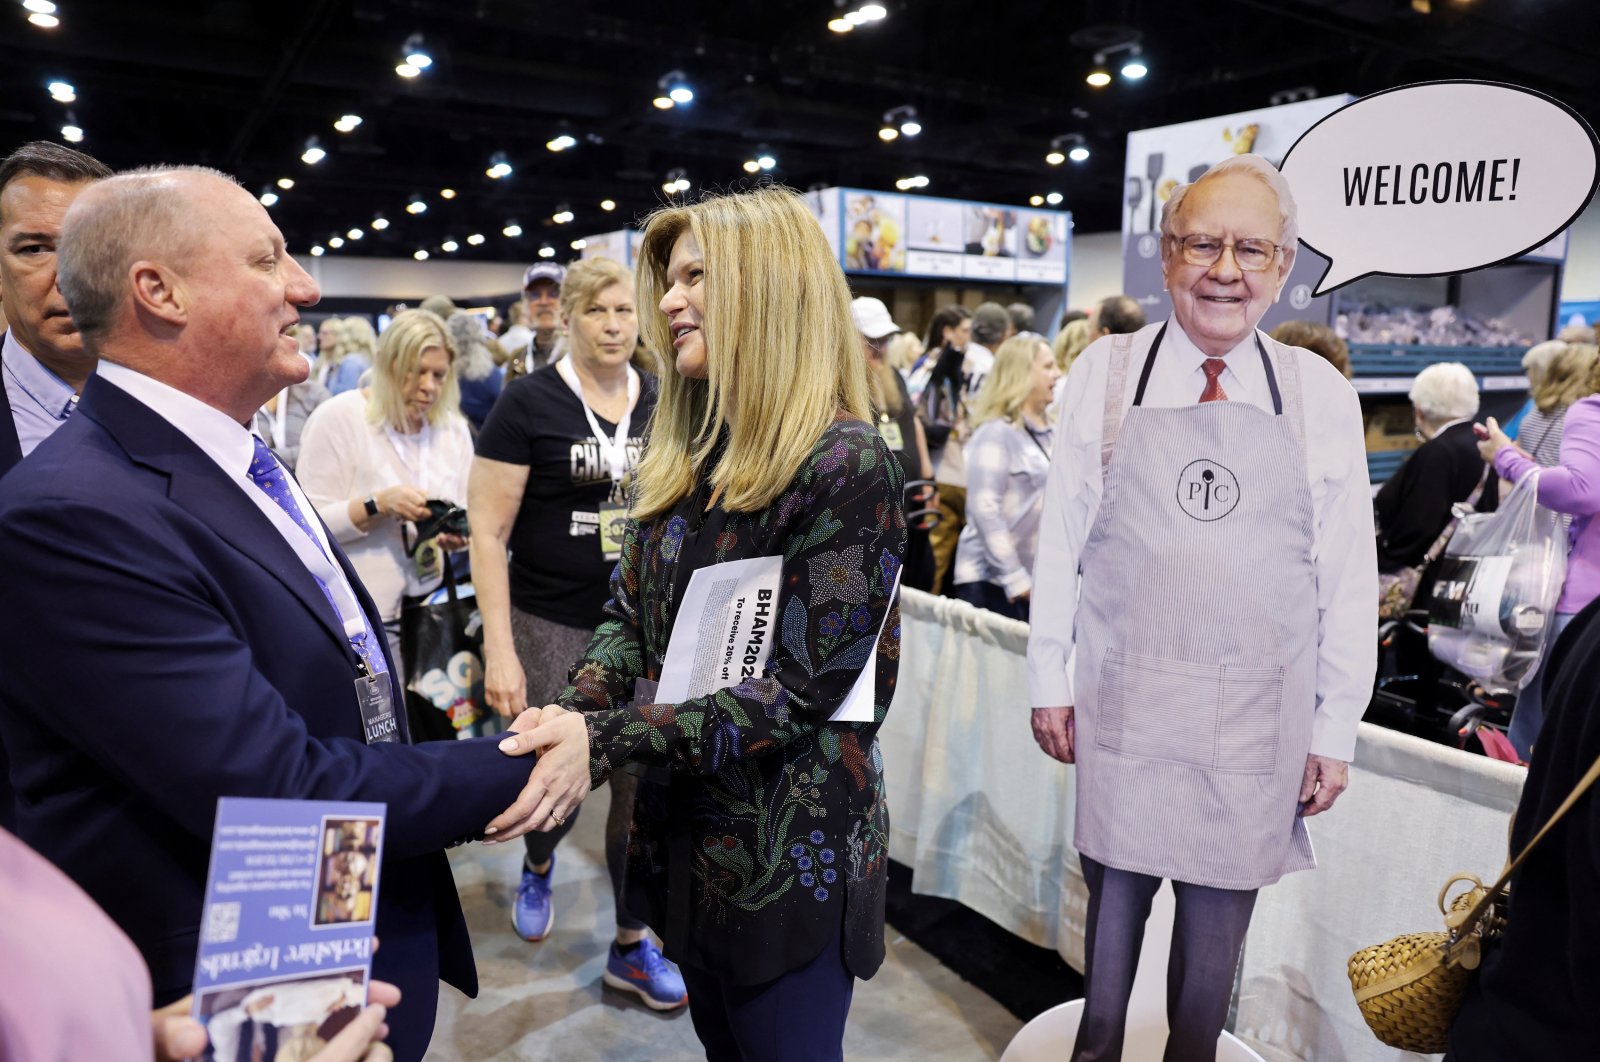 Gregory Abel, Vice Chairman overseeing non-insurance operations for Berkshire Hathaway, talks with Pampered Chef CEO Nevena Srebreva next to a cutout picture of Berkshire Hathaway Chairman Warren Buffett welcoming shareholders to shop at the Pampered Chef booth during the Berkshire Hathaway Inc. annual shareholders&#039; meeting in Omaha, Nebraska, U.S., May 3, 2024. (Reuters Photo)